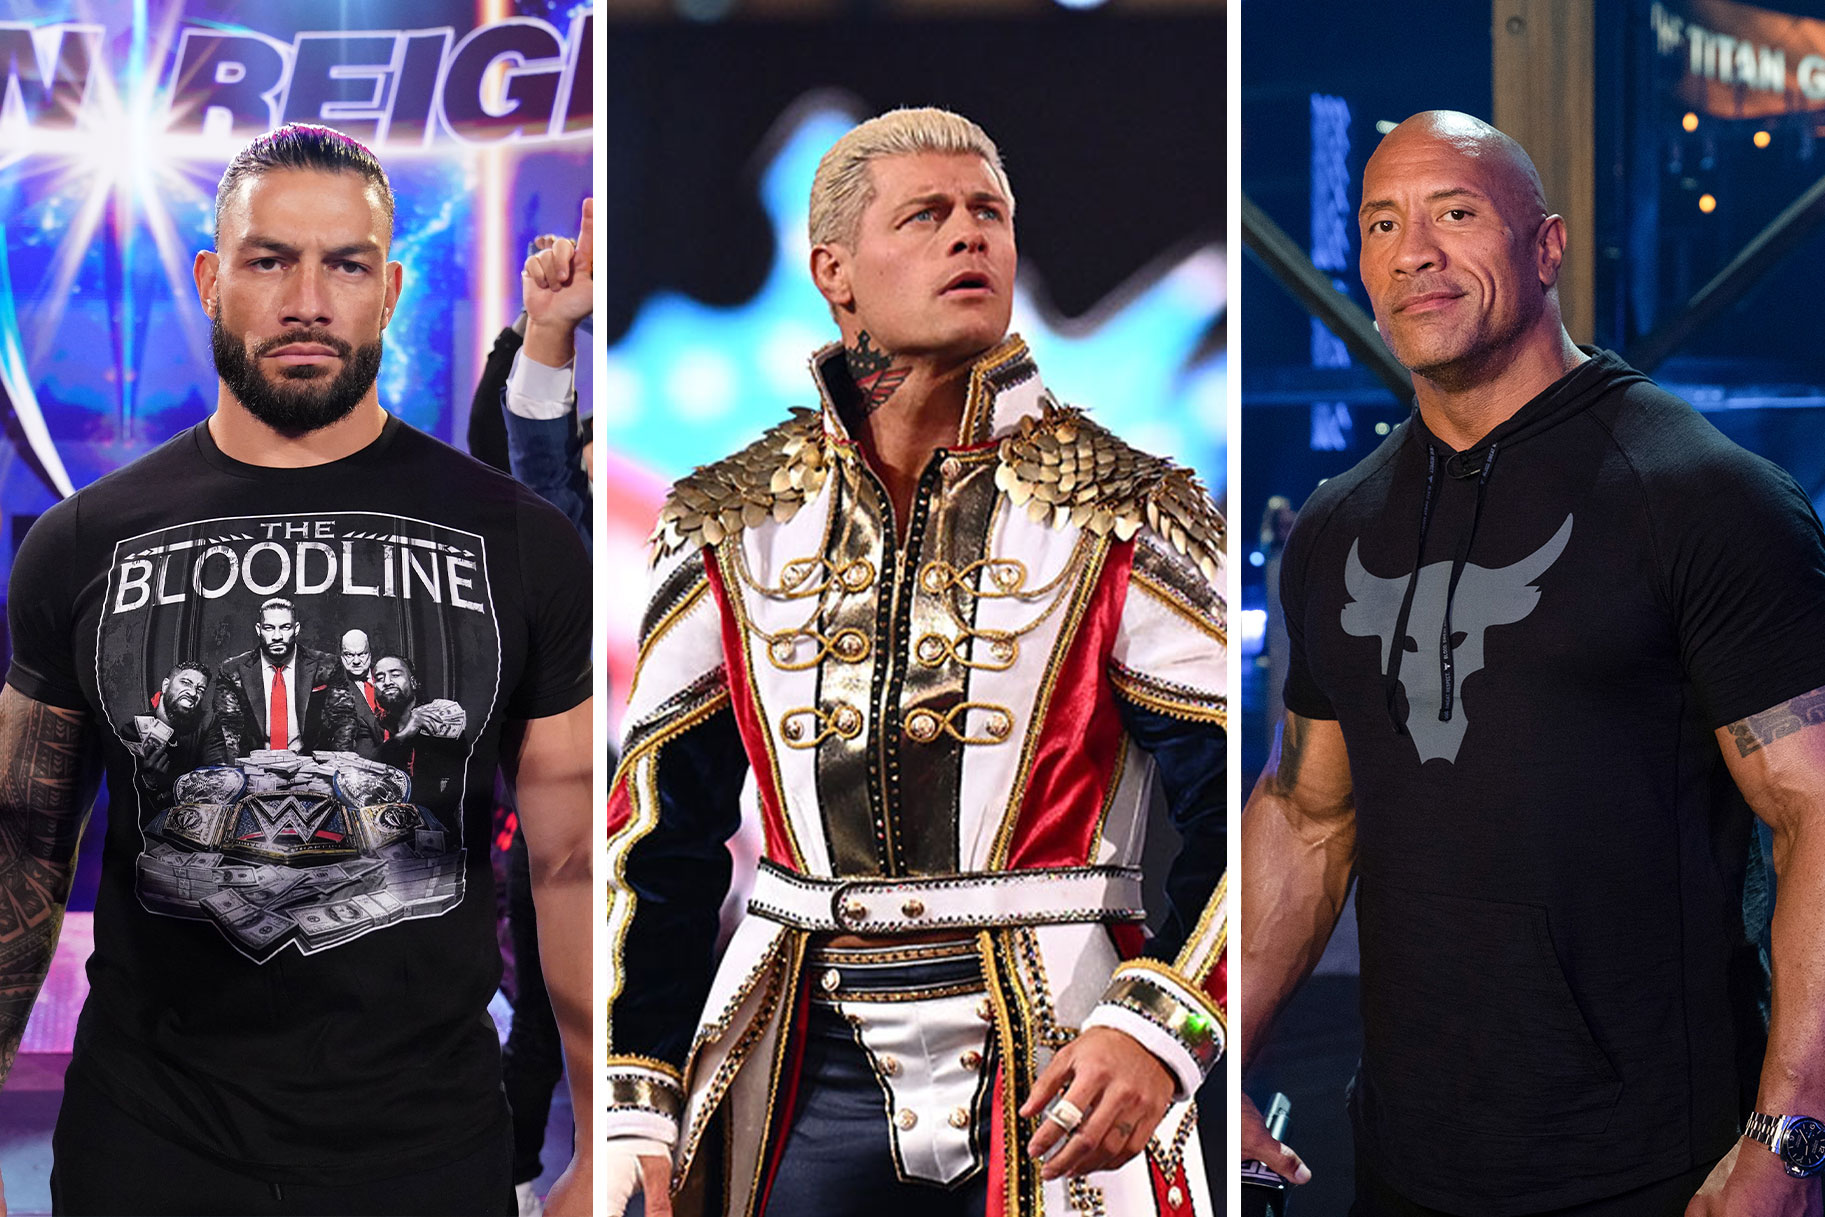 Split of Roman Reigns, Cody Rhodes and The Rock